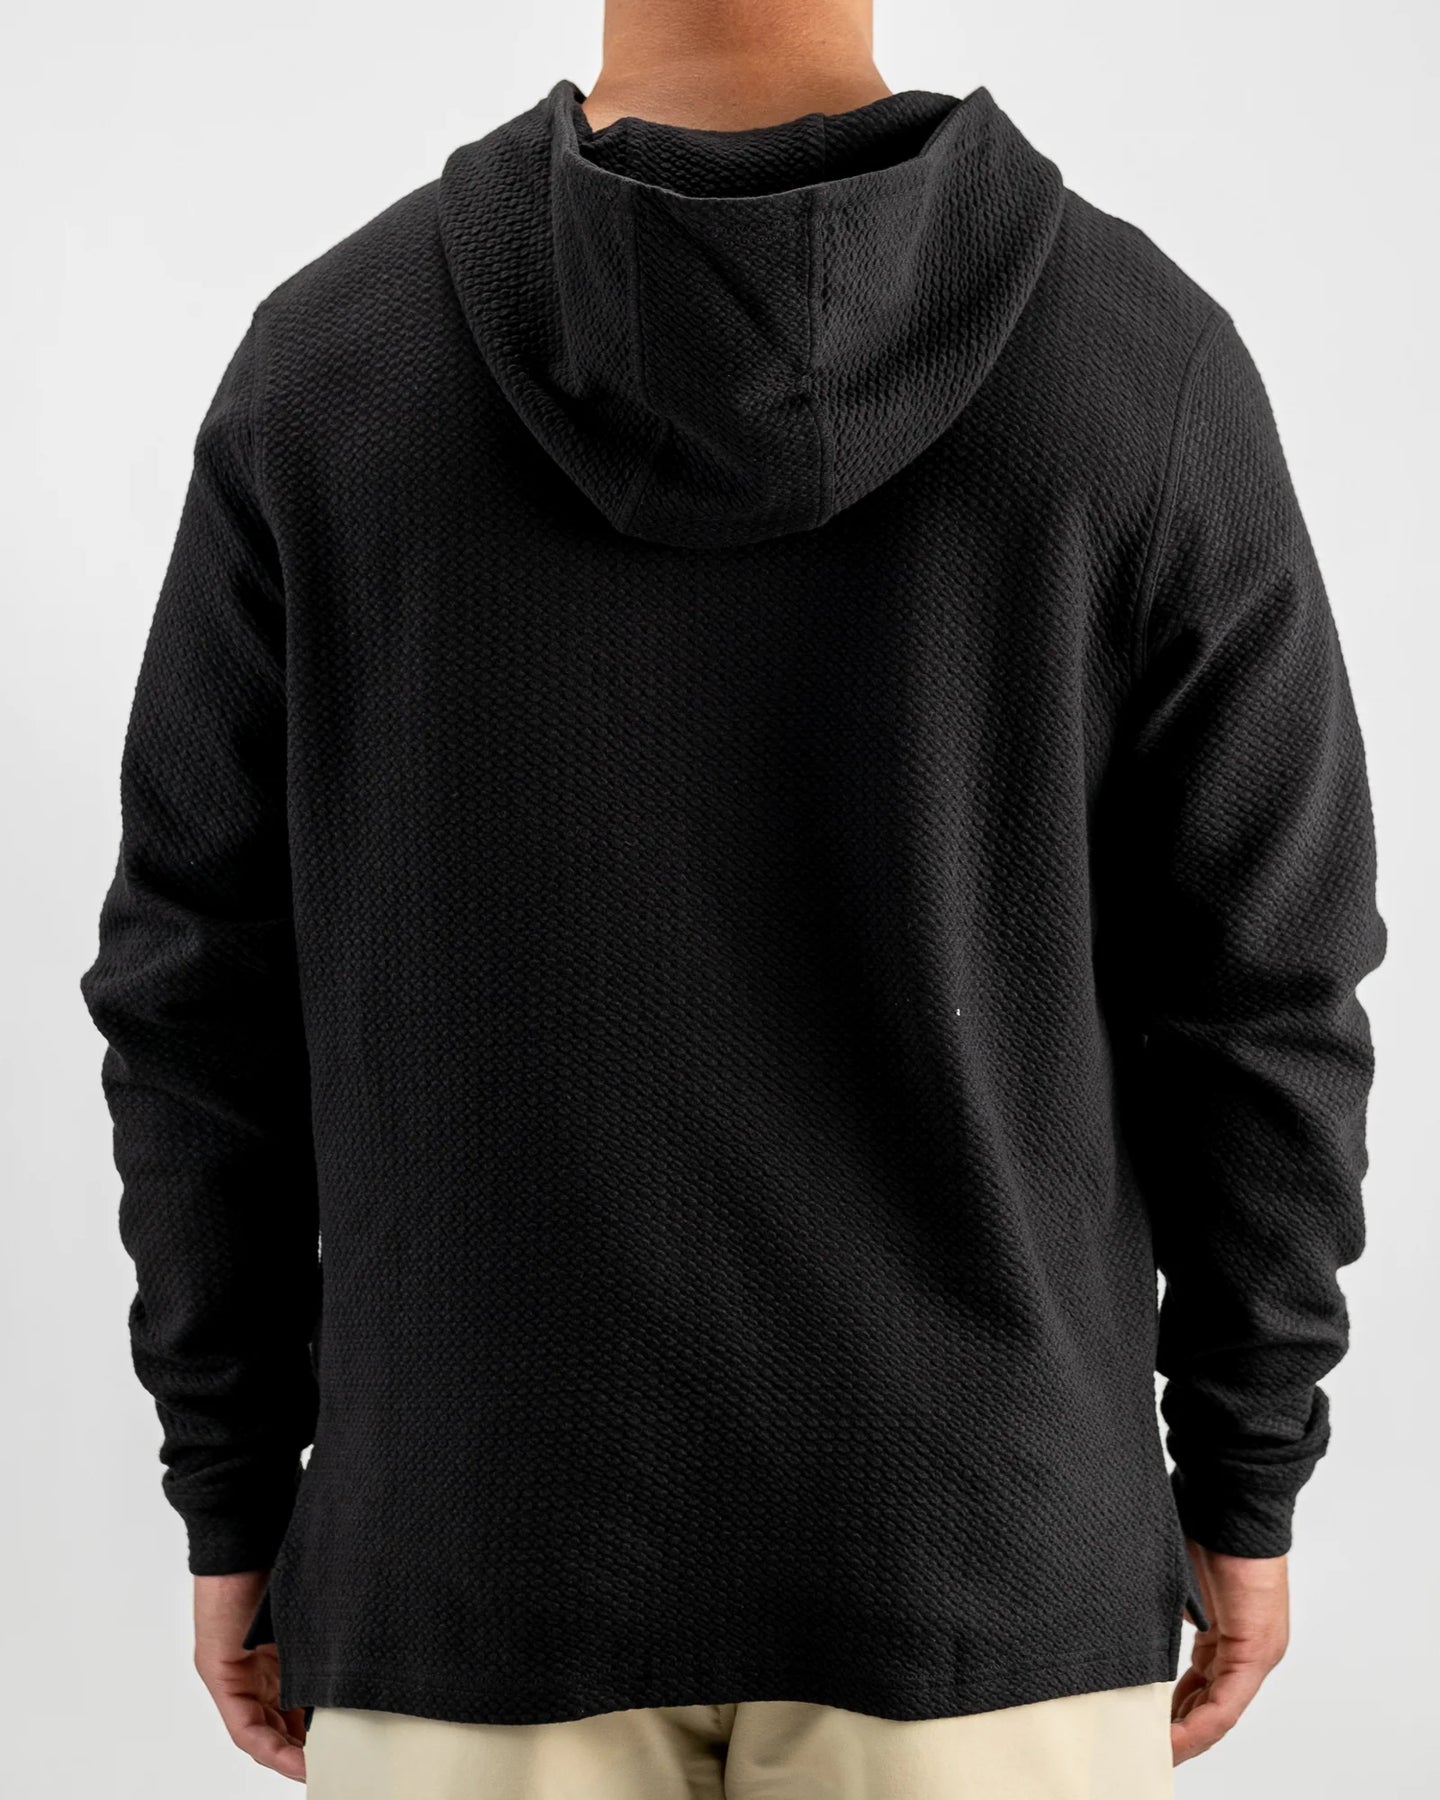 Player Preferred™ Waffle Knit Hoodie - ObsidianPins & Aces SEPlayer Preferred™ Waffle Knit Hoodie - Obsidian